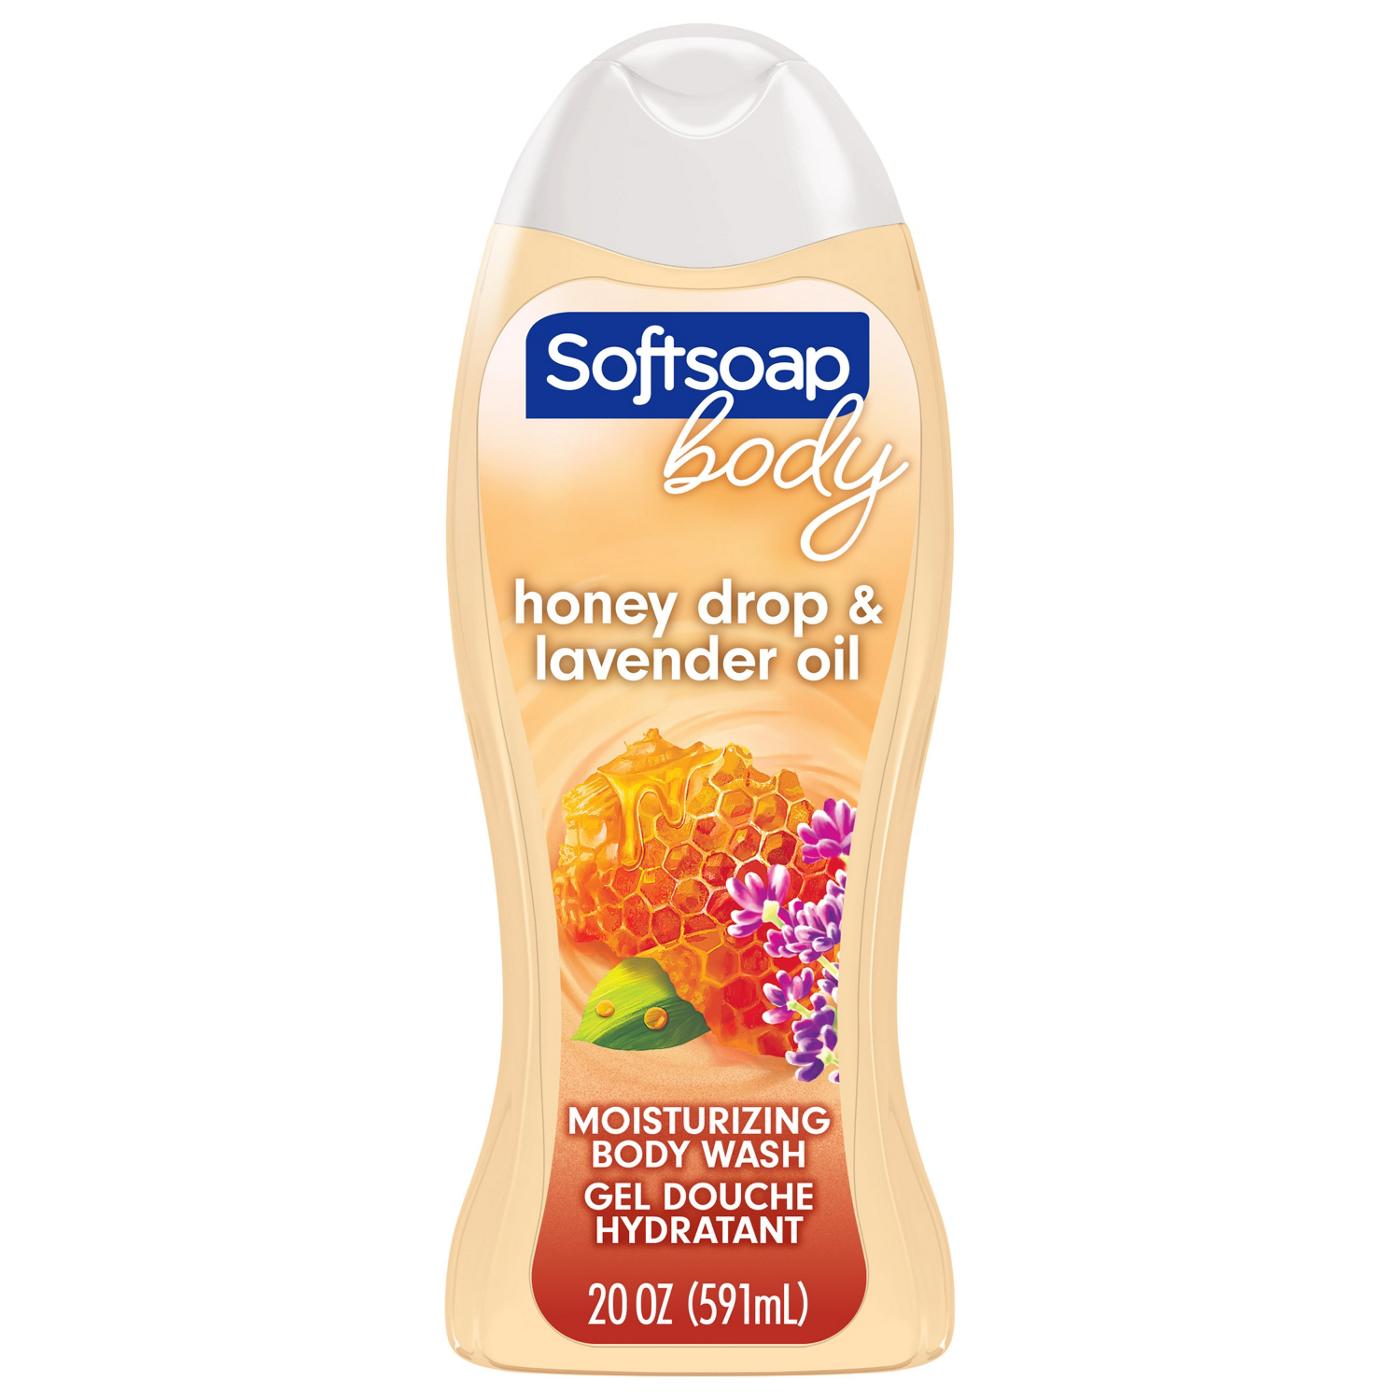 Softsoap Body Wash - Honey Drop & Lavender Oil; image 1 of 3